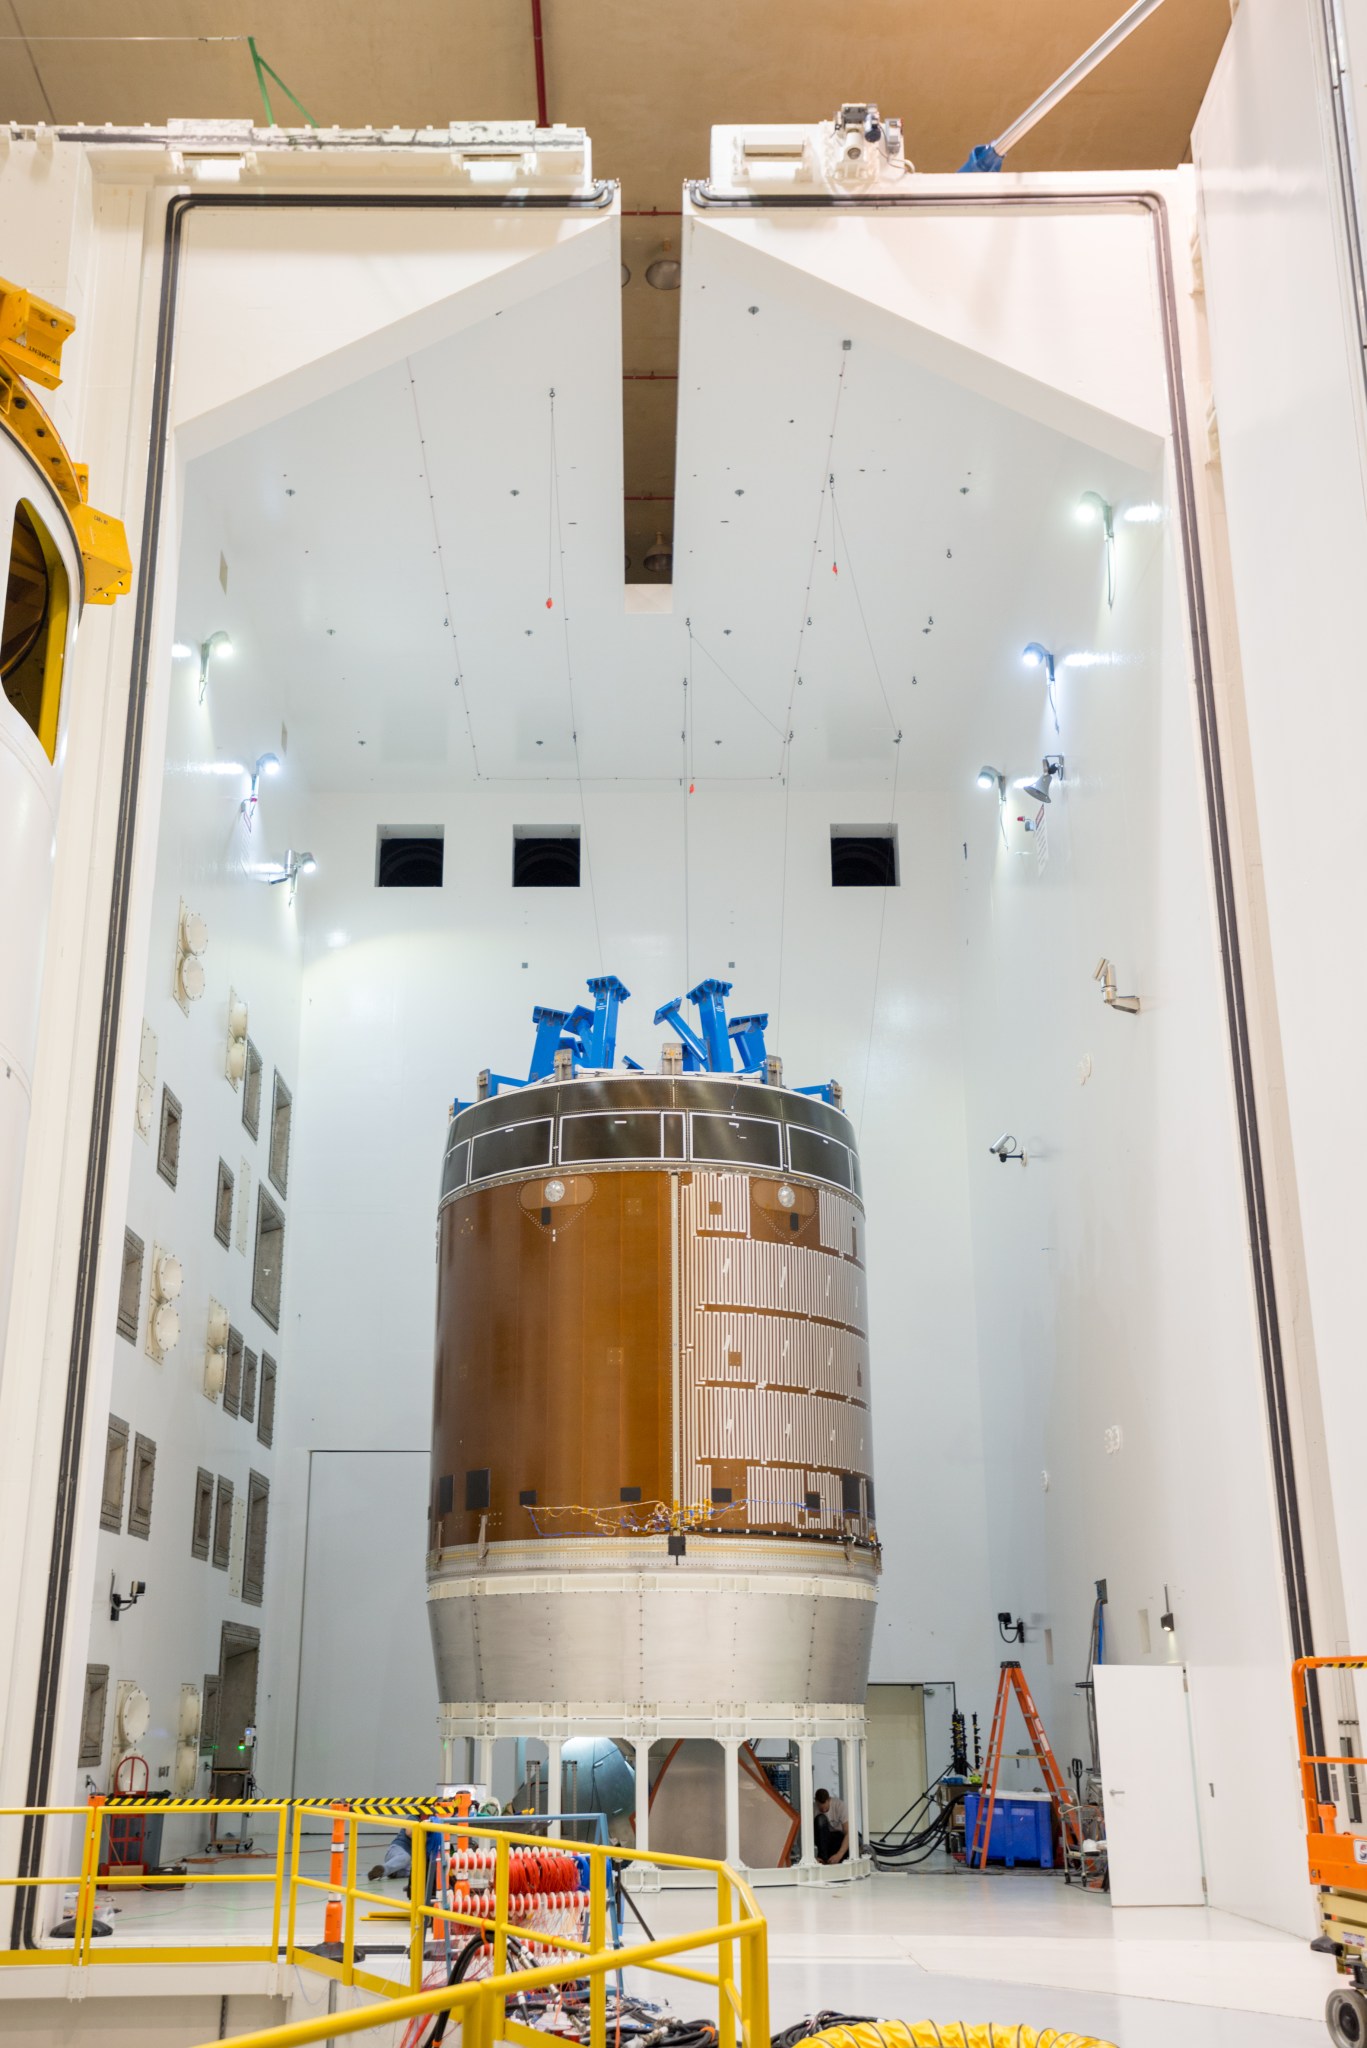 NASA Blasts Orion Service Module with Giant Horns